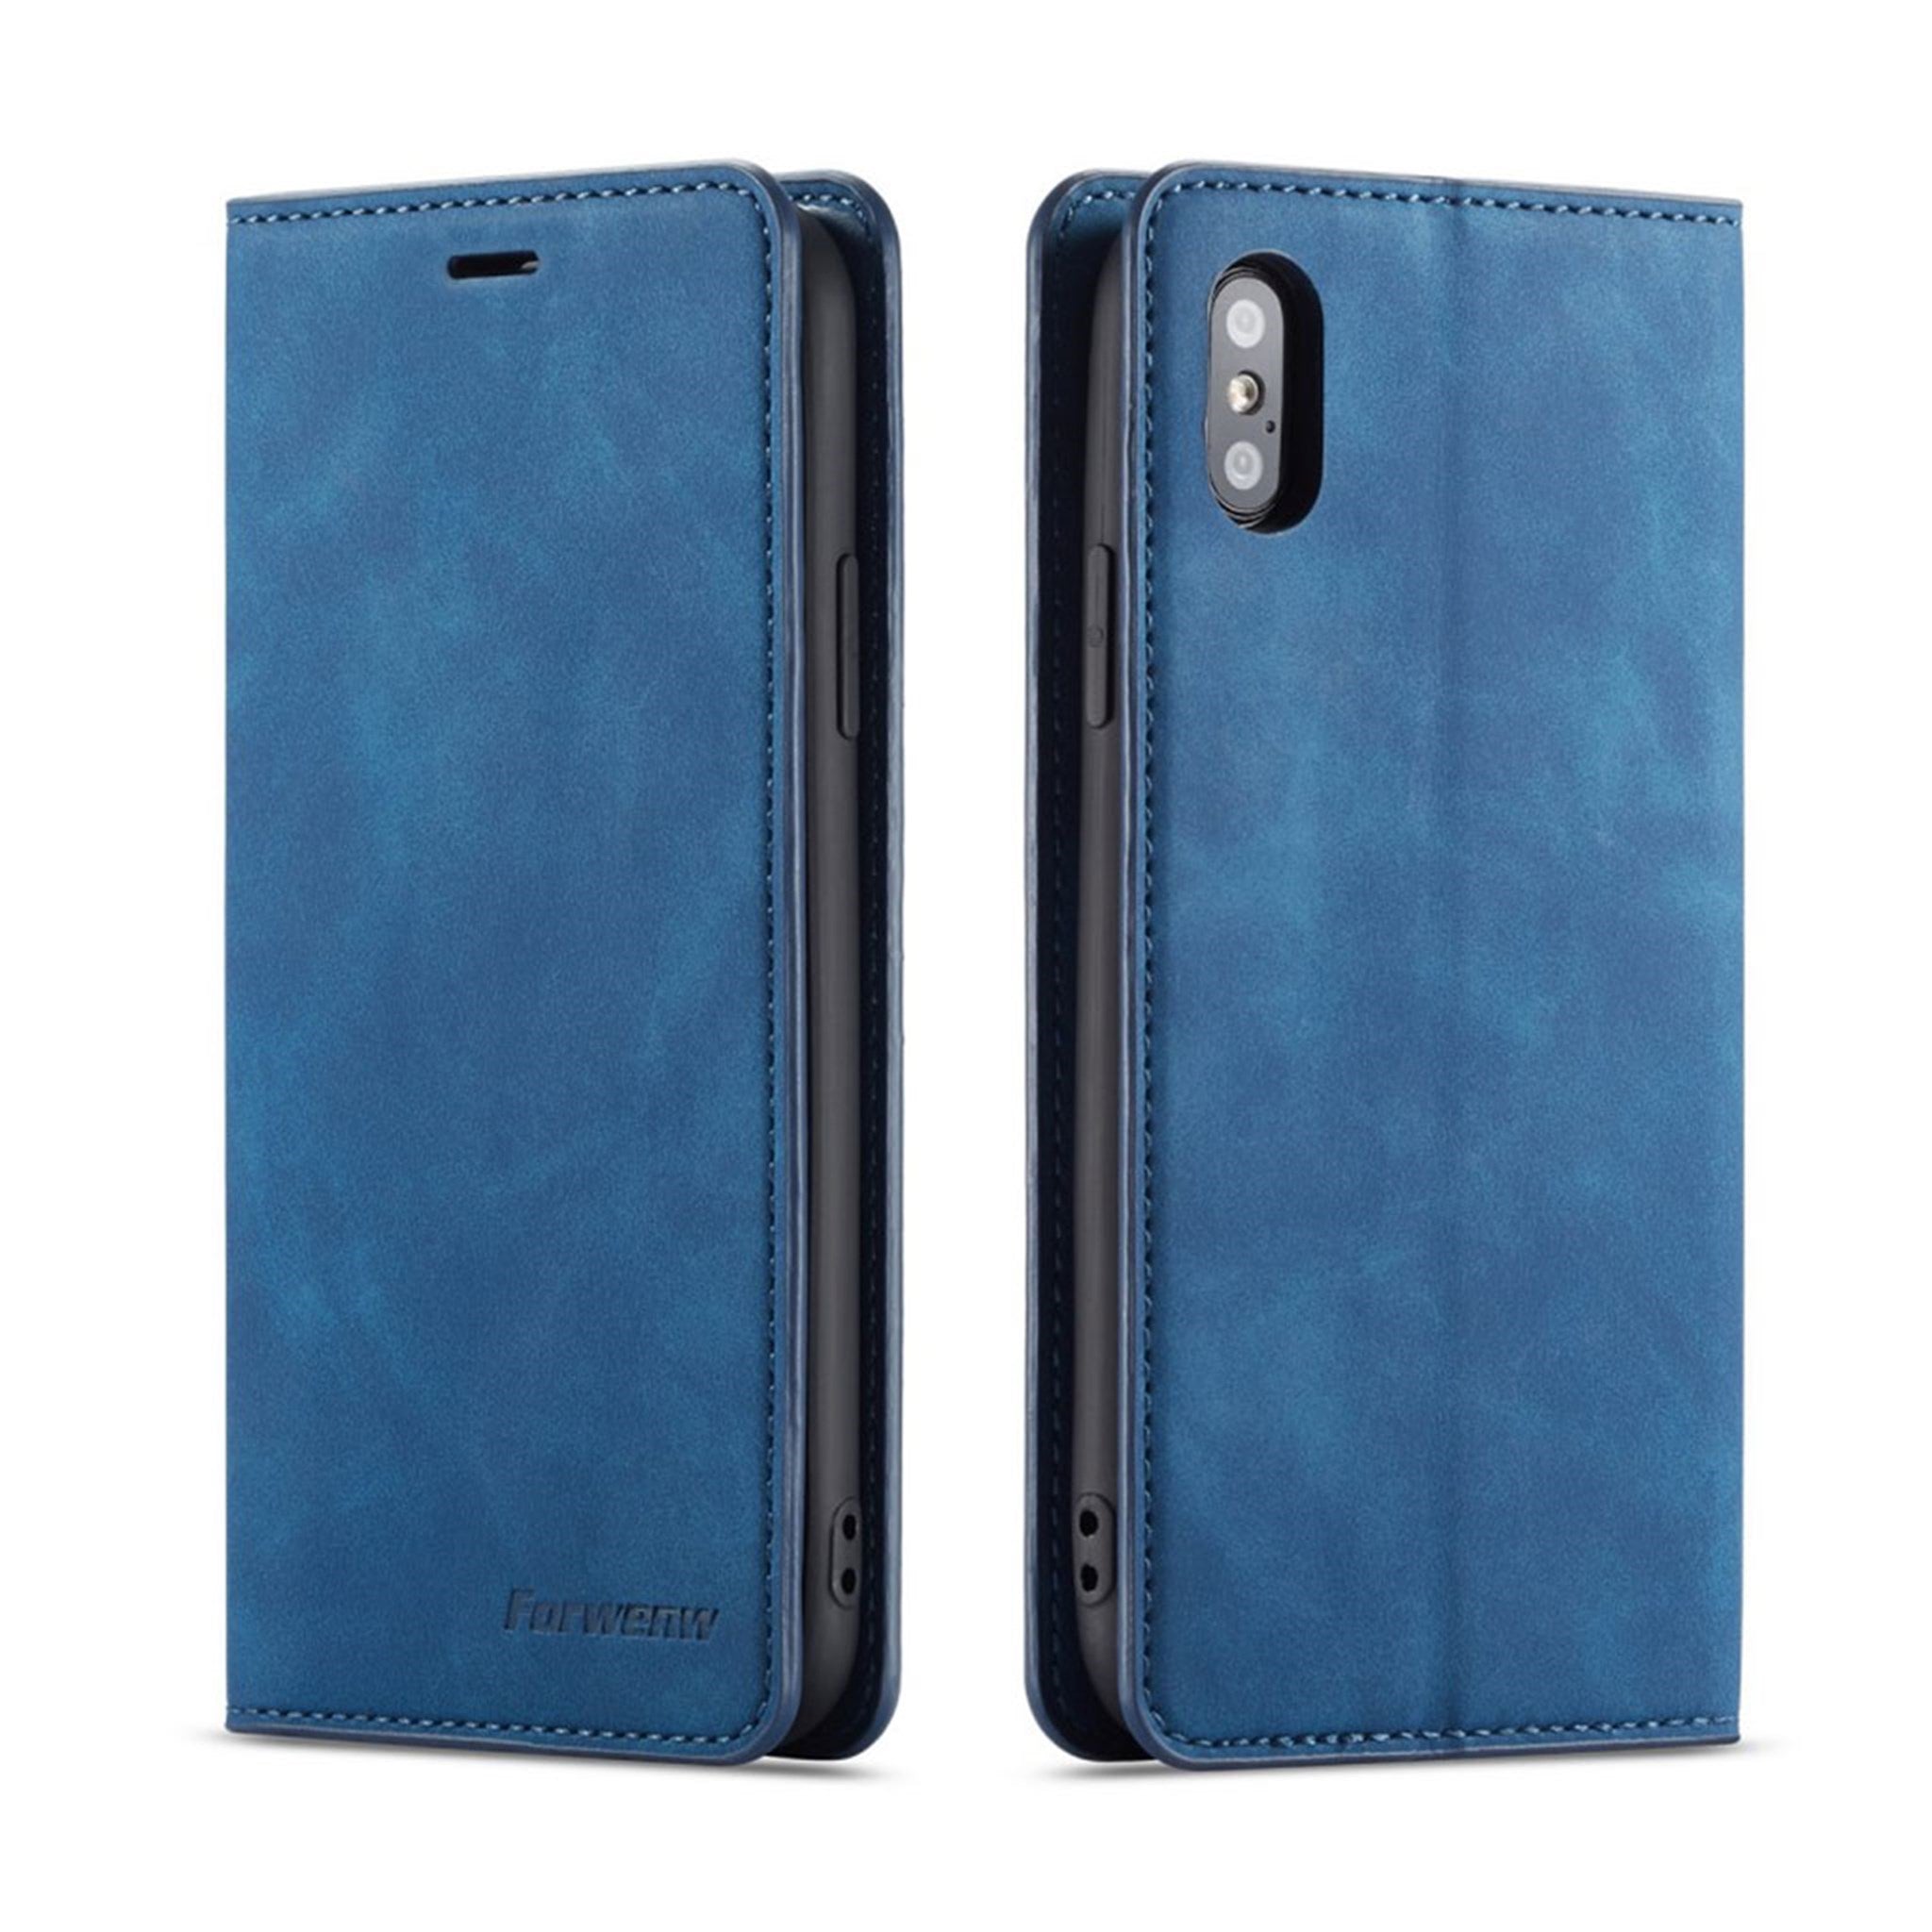 FORWENW iPhone XS leather flip case - Blue